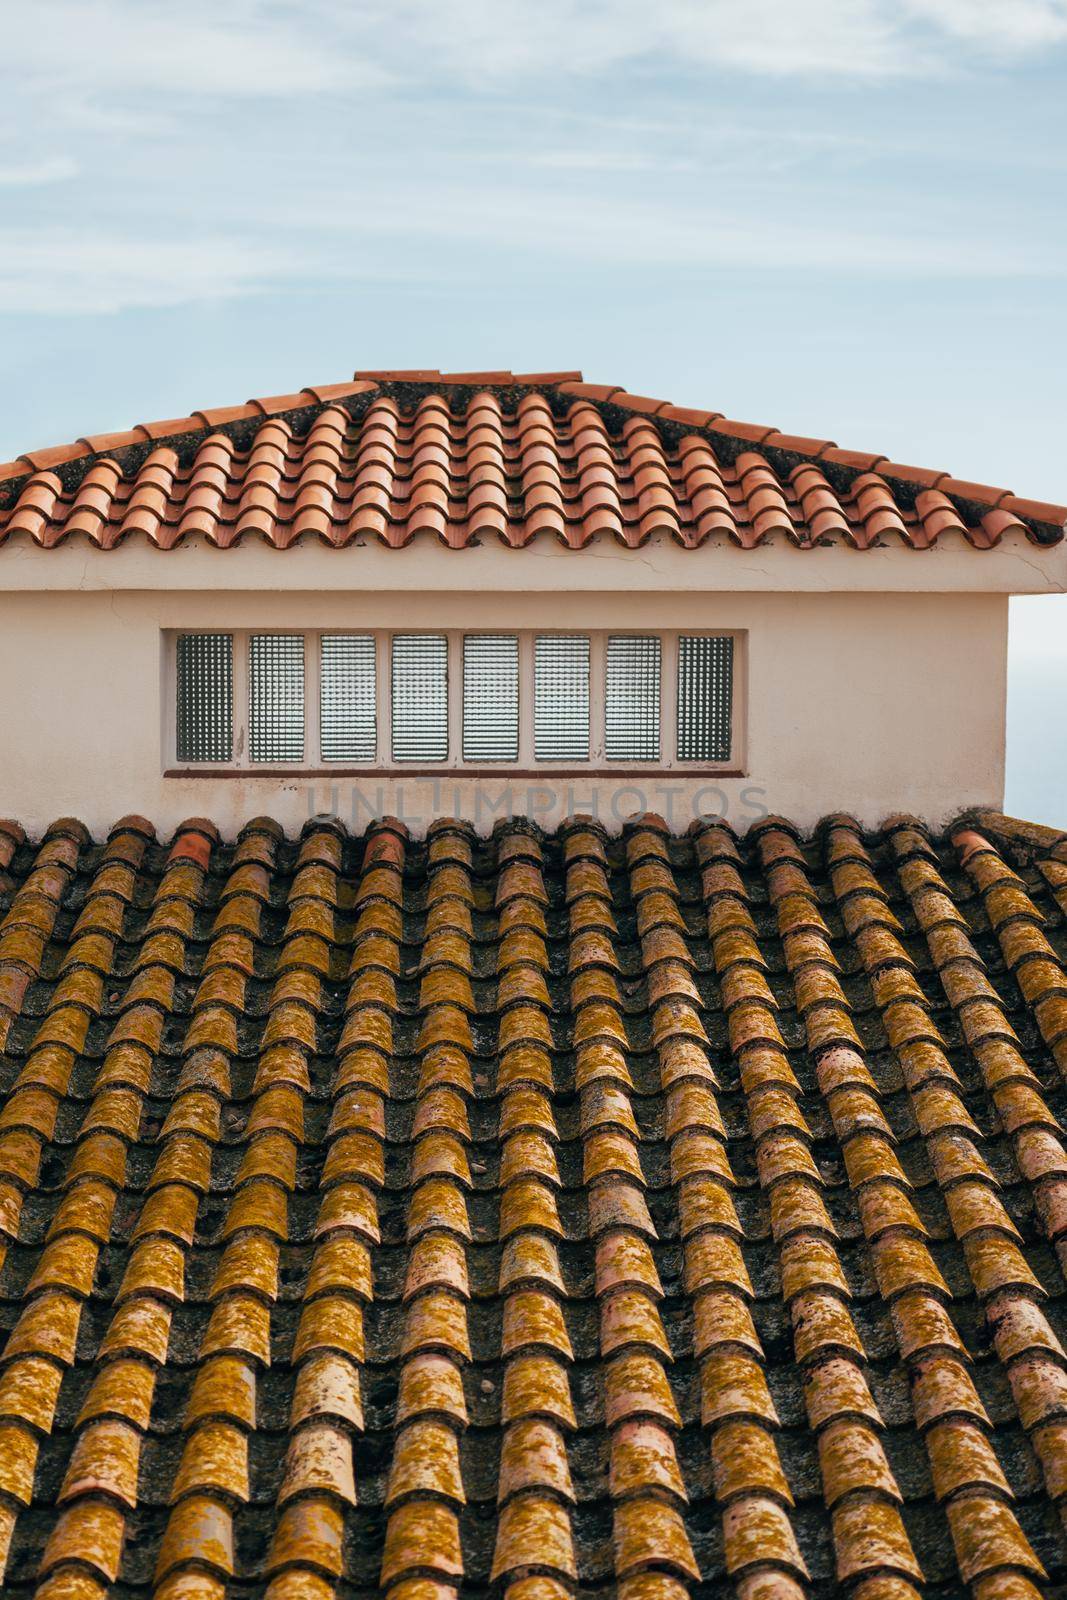 Roof of a house with small window and terracotta tiles. by apavlin